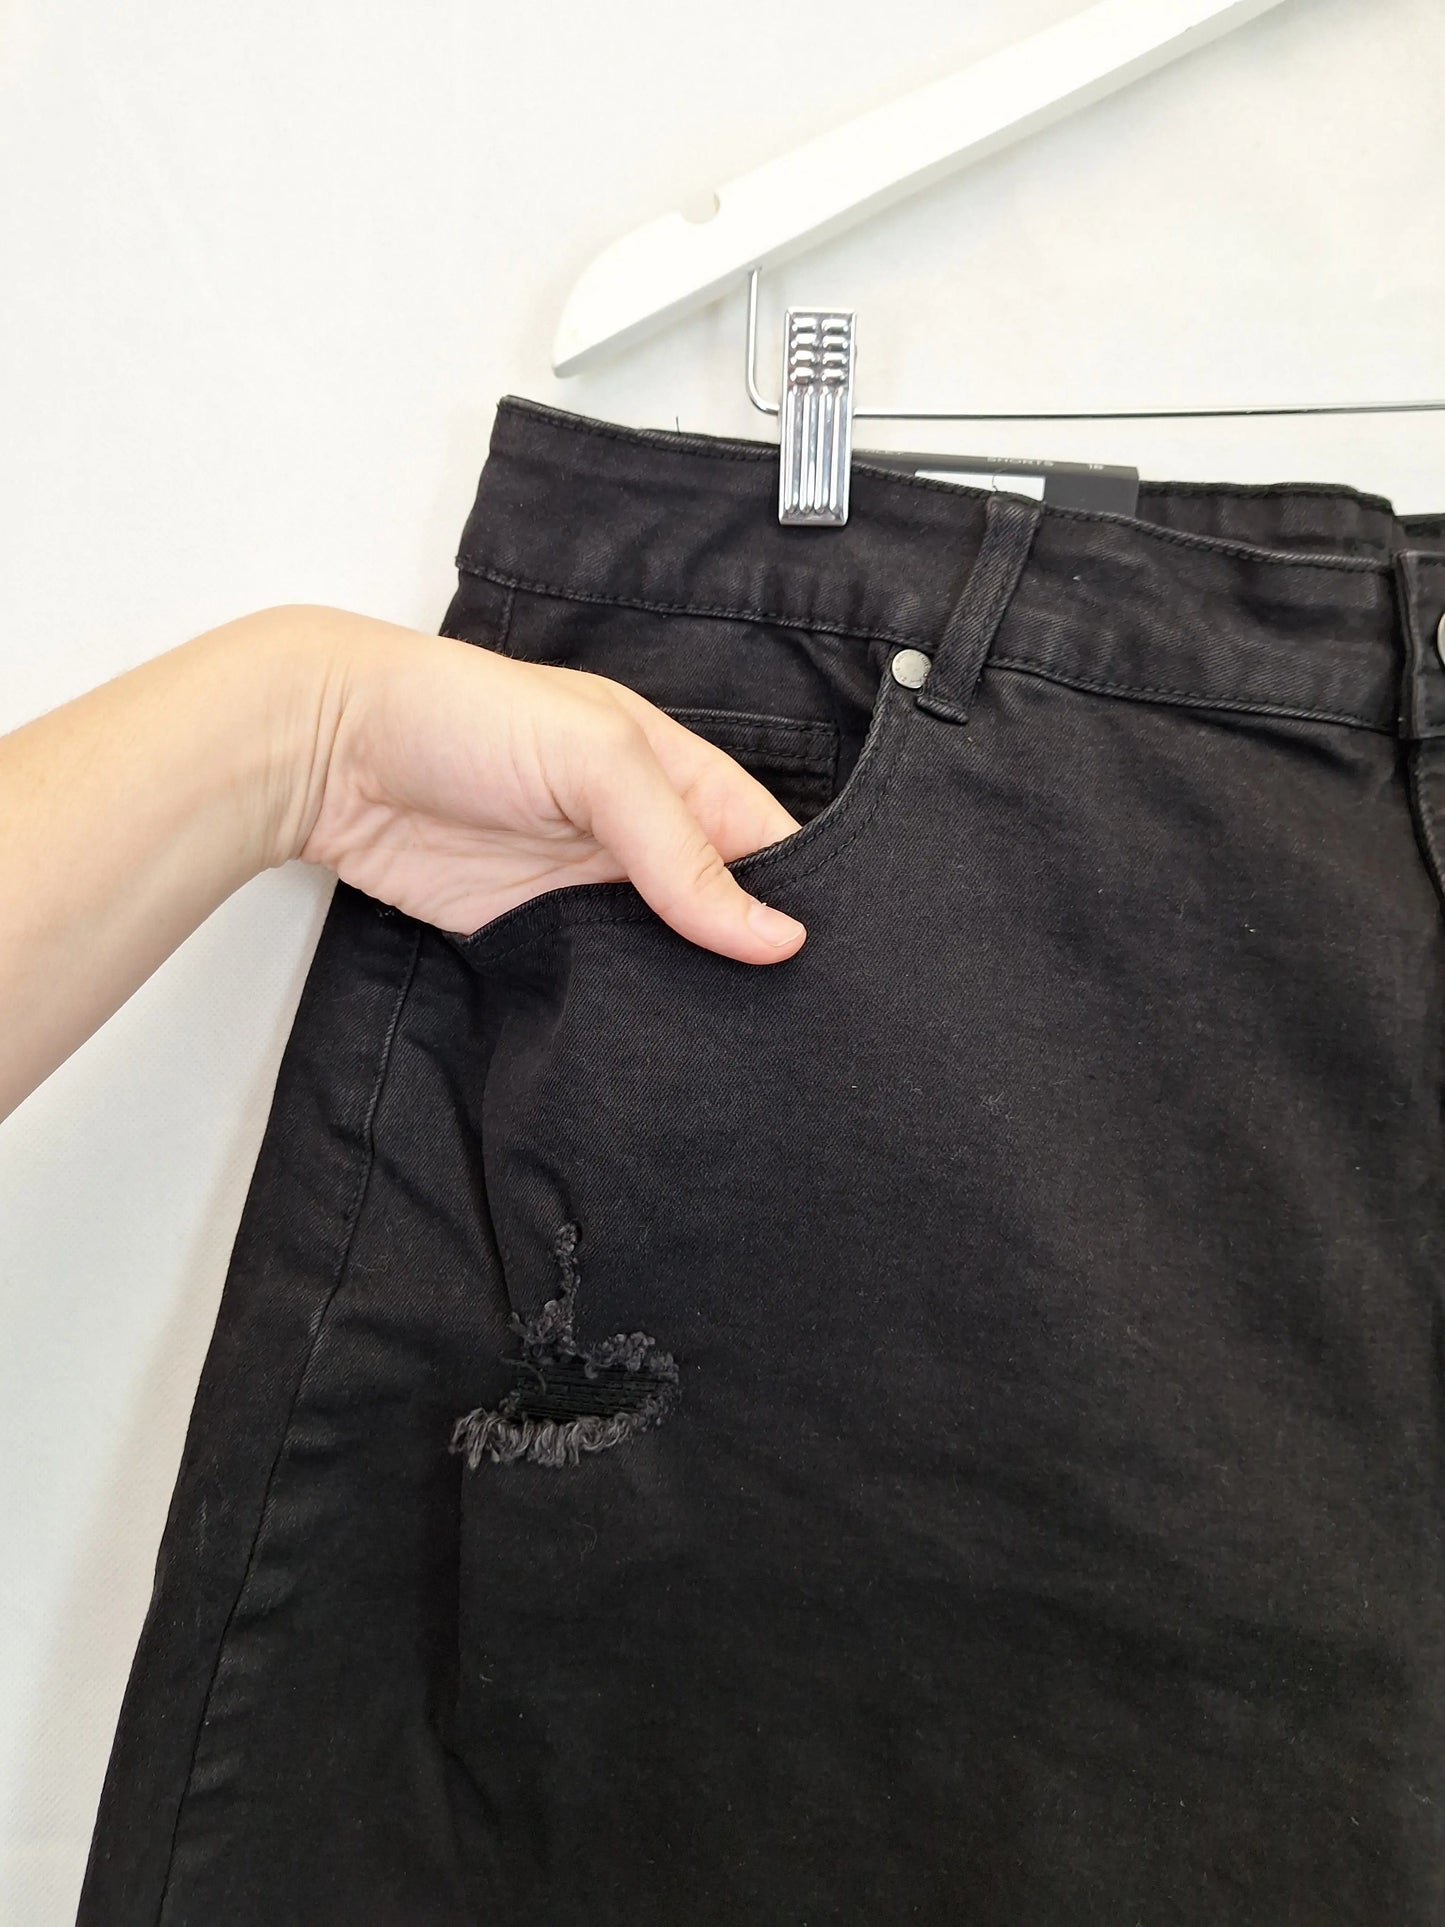 City Chic Harley Mid Rise Black Denim Shorts Size 18 by SwapUp-Online Second Hand Store-Online Thrift Store